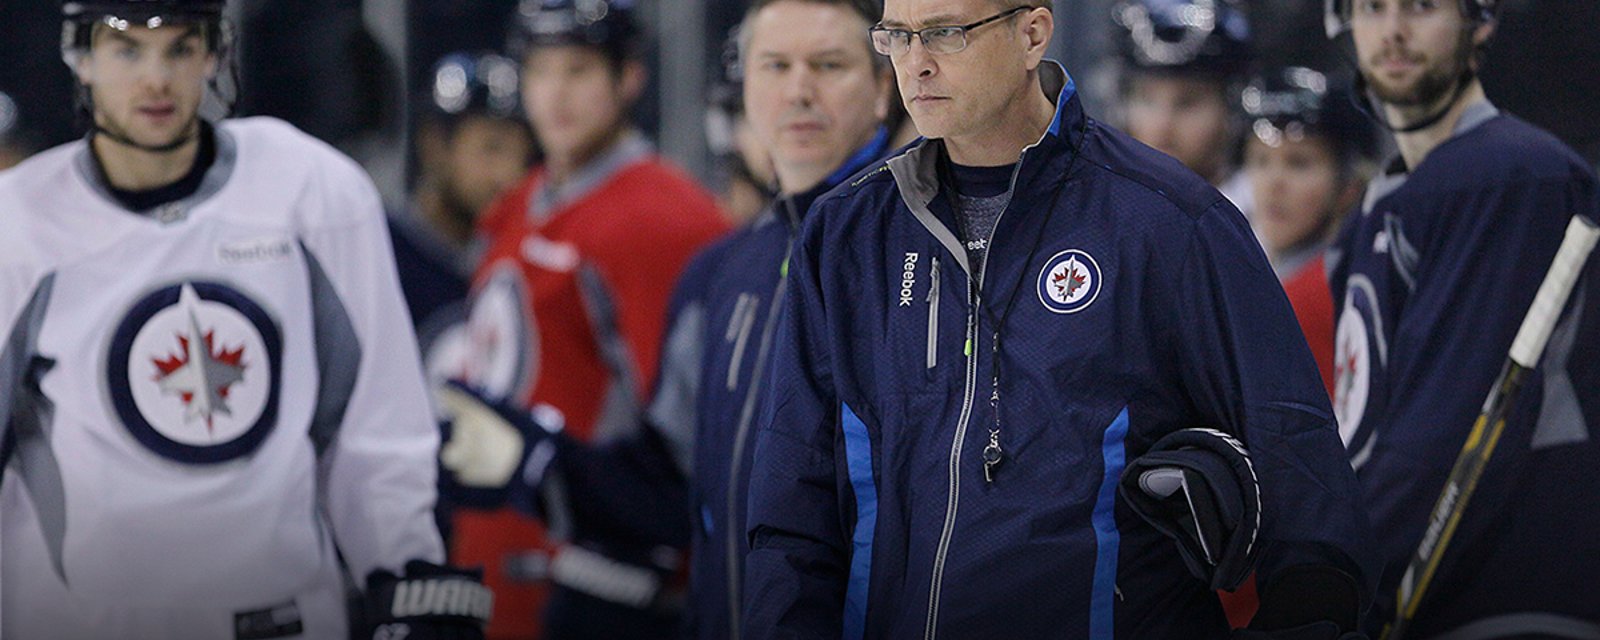 Breaking: Jets sign Maurice to a long-term deal